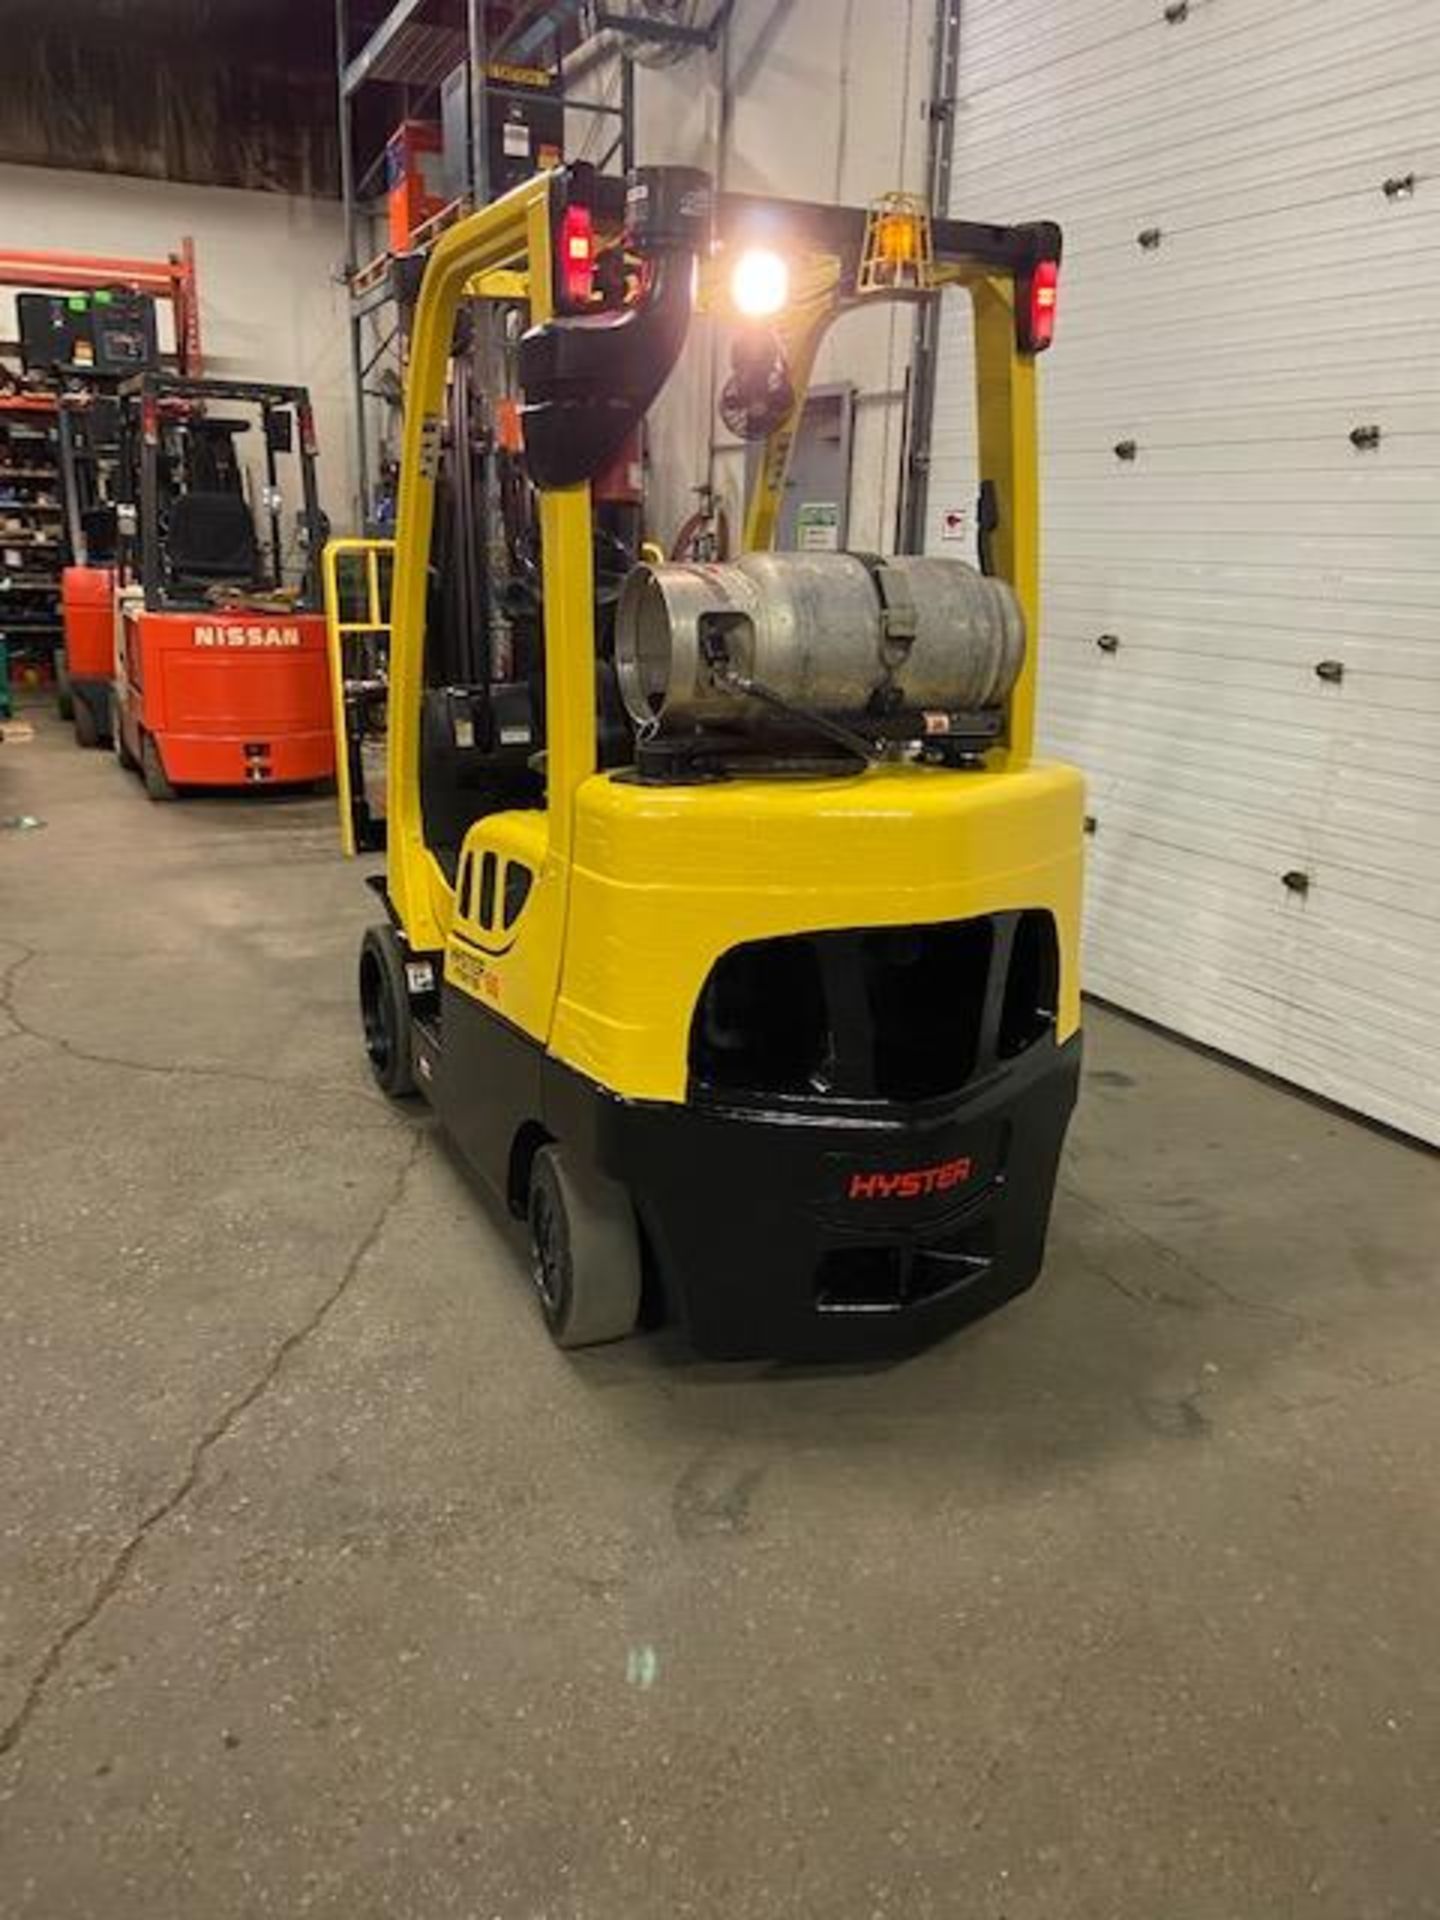 FREE CUSTOMS - 2016 Hyster 6000lbs Capacity Forklift LPG (propane) with 3-STAGE MAST with sideshift - Image 3 of 3